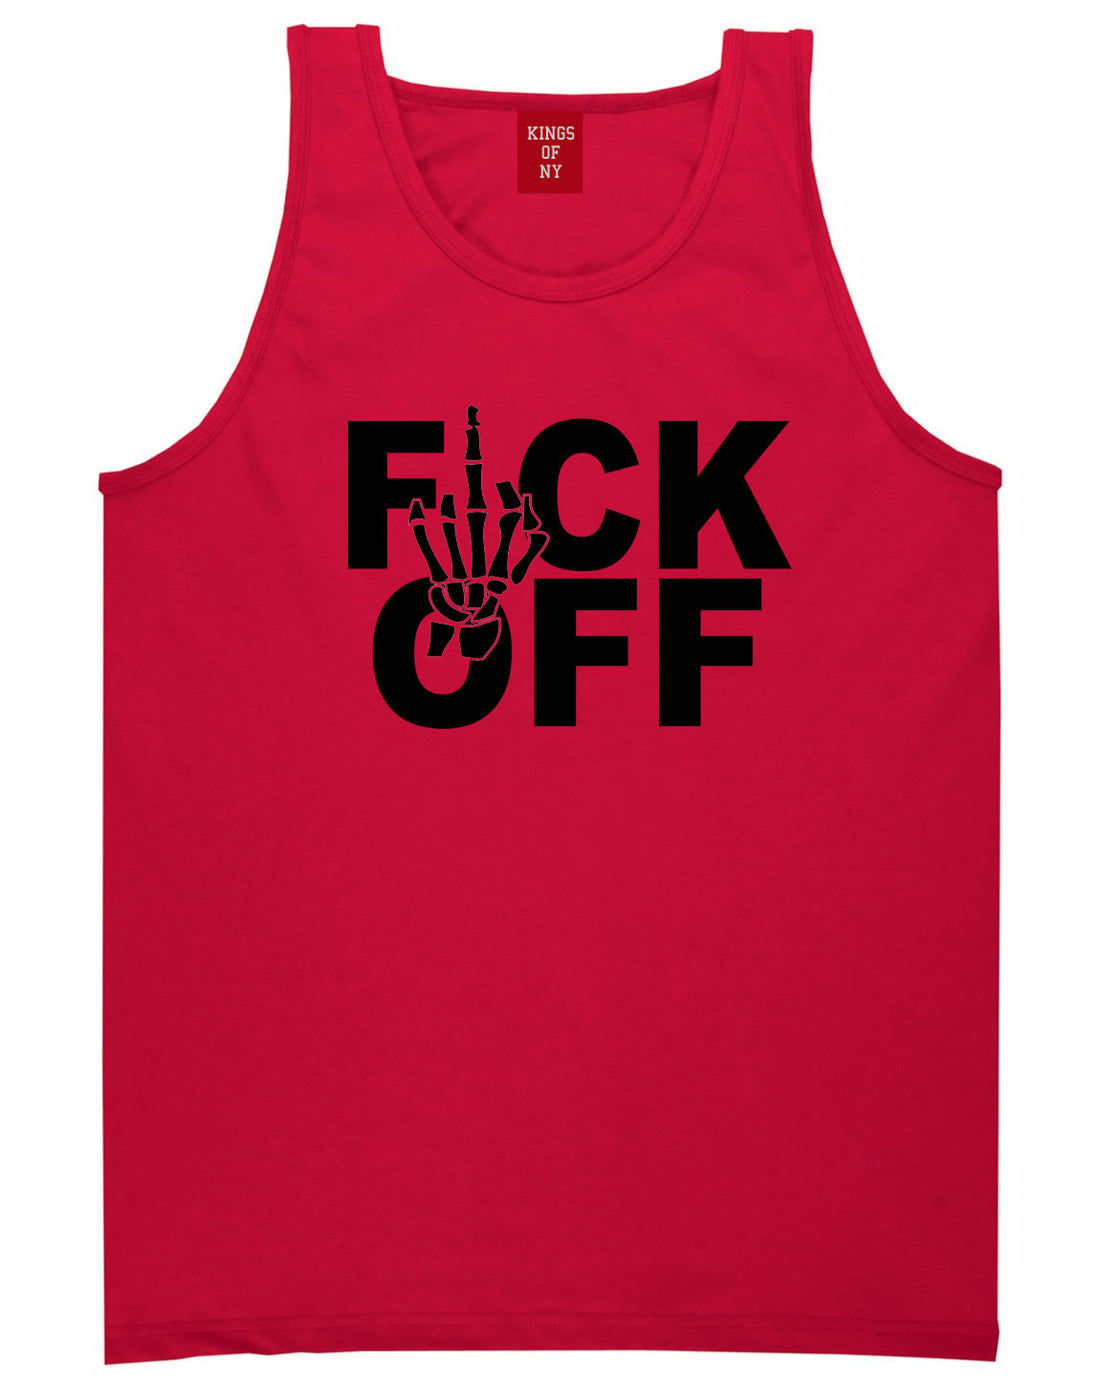 FCK OFF Skeleton Hand Tank Top in Red by Kings Of NY